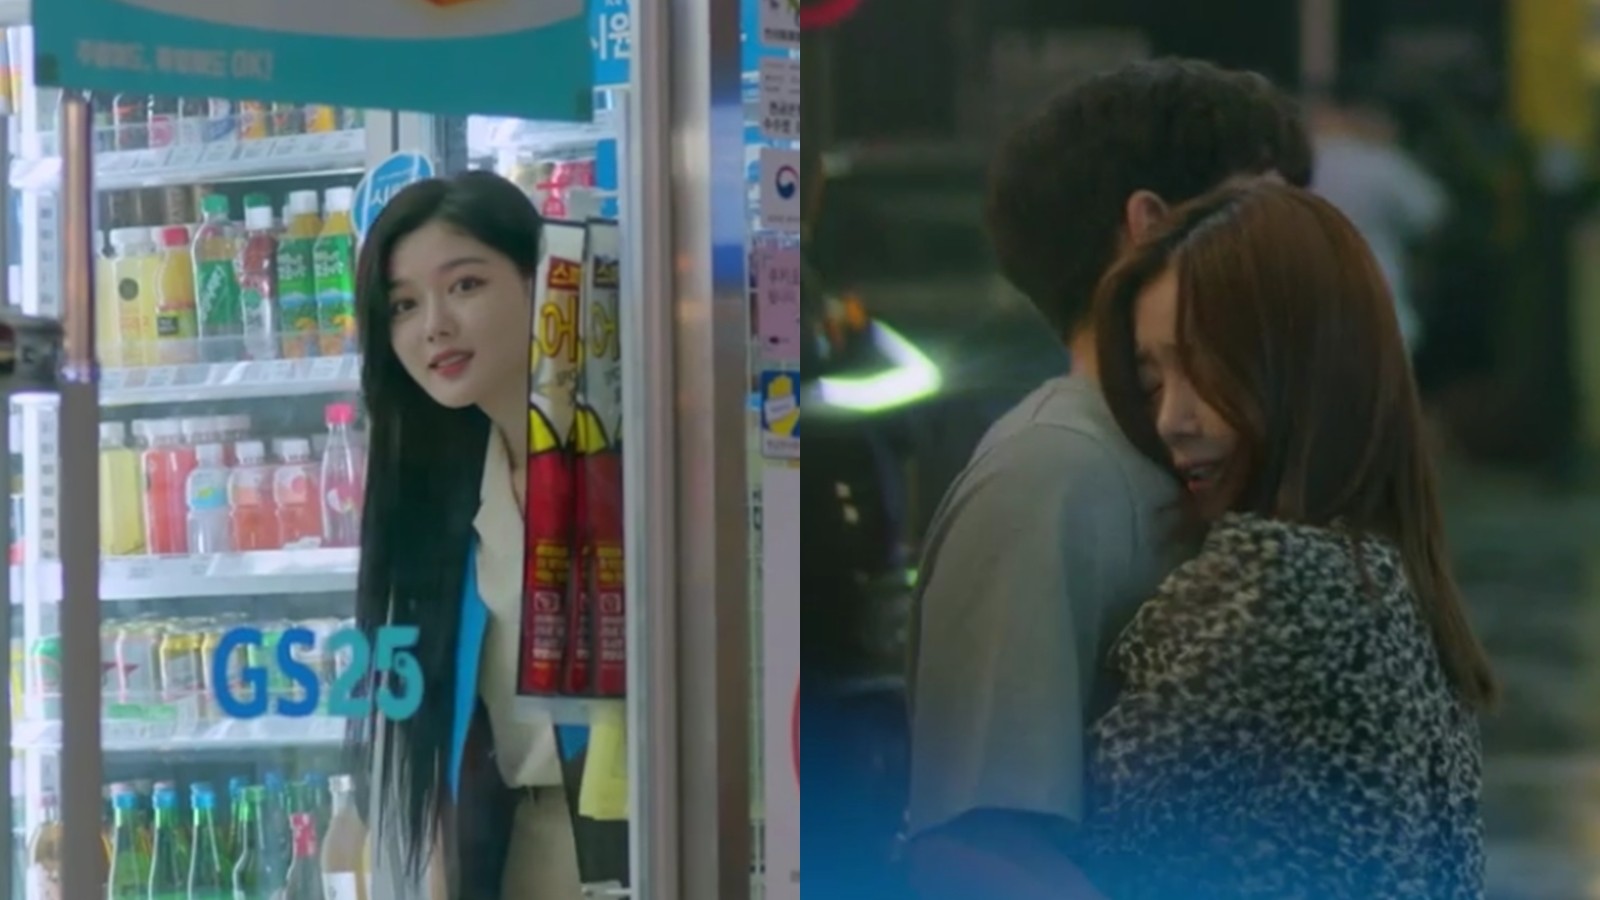 Han Sun-hwa returns to Ji Chang-wook, which Kim Yoo-jung witnessed.On SBSs Convenience Store Morning Star, which was broadcast on the afternoon of the 25th, Han Sun-hwa, a member of Choi Dae-heon, knew the truth of leaving the company and hugged Come back again.Choi Dae-heon, who was told by Kang Ji-wook (Kim Min-gyu) that I like the morning star; do not use it for the demonstration, began to feel subtle checks and jealousy.As Kang Ji-wook was treated as an entertainer, Daehyun took over action by putting foundation on his face.Kang Ji-wooks 25-hour alba experience was successful. From the beginning, high school girls were brought in to form a poetry.I was reminded by the fan. During the break, the morning star said, Why do you give the manager a disgrace? Do you feel the visual complex to our manager?But soon, My manager has a camera jam, and he is an egg in his age.Kang Ji-wook, who ate breakfast and ice cream, said, I do not think you like it very much. However, the morning star did not care about I have passed it completely.Its a lot of distraction, he said, but the morning star didnt care about Ji-wooks words: In the next shoot, Daehyun talked about another giblet, which the head offices PR team didnt like.This is a win-win thing, said Daehyun.It will be more helpful for the local economy and the Convenience store, but the public relations teams manager, Huh Jae-ho, shouted, Lets take a shot. Choi Dae-heon emphasized his position clearly, saying, It is not the junior of the public relations team, but the store owner. So, the star can not stand the anger and says, Is your mouth a sprayer?Ive known since I was panting. Daehyun, who dried the morning star, said, It was good. The morning star mumbled, Its cool, recalling Daehyun.Ji-wook, who was next to him, said, You are more cool.Then one of the children came into the Convenience store. The child, who did not pay for it, found the manager.Then Daehyun came in and sent out the morning stars and Ji Wook, and played with the child and took care of the goods.After hearing that filming had been suspended due to a collision with Choi Dae-heon, Yoo Yeon-ju (Han Sun-hwa Boone) headed to the Convenience store.The performance, which faced Daehyun himself, apologized with the distributor, saying, I heard there was a dismal thing. I apologize instead.Daehyun tried to bow his head together, but the morning star grabbed his neck and did not let him say hello.Why do you bow your head? he nagged Daehyun.Choi Dae-heon, who saw such a morning star, said, The morning star is a little trustworthy of you. The happy morning star liked to call it guard angel and stay next to you.Yoo Yeon-ju, who solved the problem, showed signs of exhaustion by making a telephone conversation. I dont really fit in with me in this neighborhood.There is nothing I like. Kong Bun-hee (Kim Sun-young) and Choi Yong-pil (Lee Byung-joon) sat next to the performance.Bunhee said, Is it a sound to listen? He said, It will look like a poor neighborhood to those who judge what they see as you.But I do not talk like you. I do not have any money. I do not have pride. I throw a frog without thinking. When Choi Dae-heon revealed his interest, the morning star said, I will look at the black notice.I can not do it now, and someday it will be a situation.  To become a Convenience store manager, I have to be a high school graduate. Daehyun remembered the words of the past star, saying, You are a dream florist. The surprised star said, How did you know? But today, my dream changed because of the tremendousness.I want to be as cool as the manager, he explained.In the words of Daehyun, The secret that only the child and I know, the morning star said, It is the most wonderful secret in the world.Michael, I was getting better and better in this place, the Convenience store, and I thought I was the person I needed.I am determined today, he said to Daehyun. I am the best at the manager. Kang Ji-wook, who was outside the window, said, That look comes only to the manager.Choi Dae-heon and Kang Ji-wook had a nervous battle to go home first to leave the two in the Convenience store. But the morning star said, Are you saying there are both?Then there are two. I have to get some snow. Jeong Sae-byeol went to see her sister Eun-byeols Showcase, but she couldnt see the stage in a trembling mind, and later she faced the video and was soaked in extraordinary emotion.The morning star could not take his eyes off his brother and was excited by the cheering.The star, who slipped and fell on the showcase stage, made a strong impression with Coffy Tuhon and emerged as an SNS star.The sisters were thrilled by the phone, and the morning star revealed her temperament, saying, Why do you fall? Is Coppy okay?I was so immune that I woke up again, he said. I was so hit by my sister that I did not have to do that.Im sorry to bother you. Do you know how much I wanted to say this? Just hang in there.Ill give you a boost, he asserted.Now it is a silver star that seemed to walk only on the flower path, but the pictures of the past days have caught my ankle.The traffic lights that were hit by the morning stars were stored in pictures of silver stars that could cause Iljin controversy. The traffic lights threatened to say, Five to five, did not you forget?He also asked him to arrange a meeting with Kang Ji-wook. So he asked Ji-wook, Please help me once.Jung Eun-byeol, who met Kang Ji-wook, said, You should not disclose the pictures they took. I did not do anything bad. I did not have parents.Ji-wook, who recalled the face of the morning star, met with the silver star and the bad seniors, and asked him to keep the promise to the silver star.Ji-wook told Eun-hee, I do not want to get close to those people. Eun-hee thanked him and said, Please keep it secret from my sister.I really die if I know that I called my brother. Ji-wook was a brother by touching his friends brothers shoulder, but the traffic lights were taken in the photo.She came to the Convenience store to meet her sister, and she laughed happily, but she showed her picture to her sister and cried, What do you do?The morning star was frustrated, but said, Send the picture to me. Choi Dae-heon congratulated the younger brothers debut and made a chocolate pie cake himself.Daehyun also made a place for the morning star to study. Daehyun said, I study to make you study.The impressed morning star embraced Daehyun, but Daehyun pushed the morning star away, then hugged again and said, I tried to hug you first.Kang Ji-wooks publicity effect was great: Shin Sung-sik, developed in Choi Dae-heons Convenience store, was popular and invited; the head office was also pleased with the effect.When I go out, I pretend to be cool, I still pretend to be cool, said Bae, who liked this phenomenon.Yoo Yeon-ju, who felt strange, recalled Daehyun saying, I think this is the right thing to do with his resignation and went through the filing cabinet.The performance was confirmed by Choi Dae-heon, the person in charge of the Voice Phishing Prevention Campaign, which was handled by himself but was overshadowed by cooperation with the police.When asked about the facts, he said, Chairman Cho Seung-joon (Chairman Do Sang-woo) told me not to tell you, please make confidentiality. I know what kind of personality Choi Dae-heon is.Choi Dae-heon said, My condition was to keep it secret.Yoo Yeon-ju, who ran straight to the Convenience store, confronted Daehyun and said, Why didnt you tell me? Why did you lie?Im sorry, Mr. Daehyun, Ill put it all back. The star embraced Daehyun.